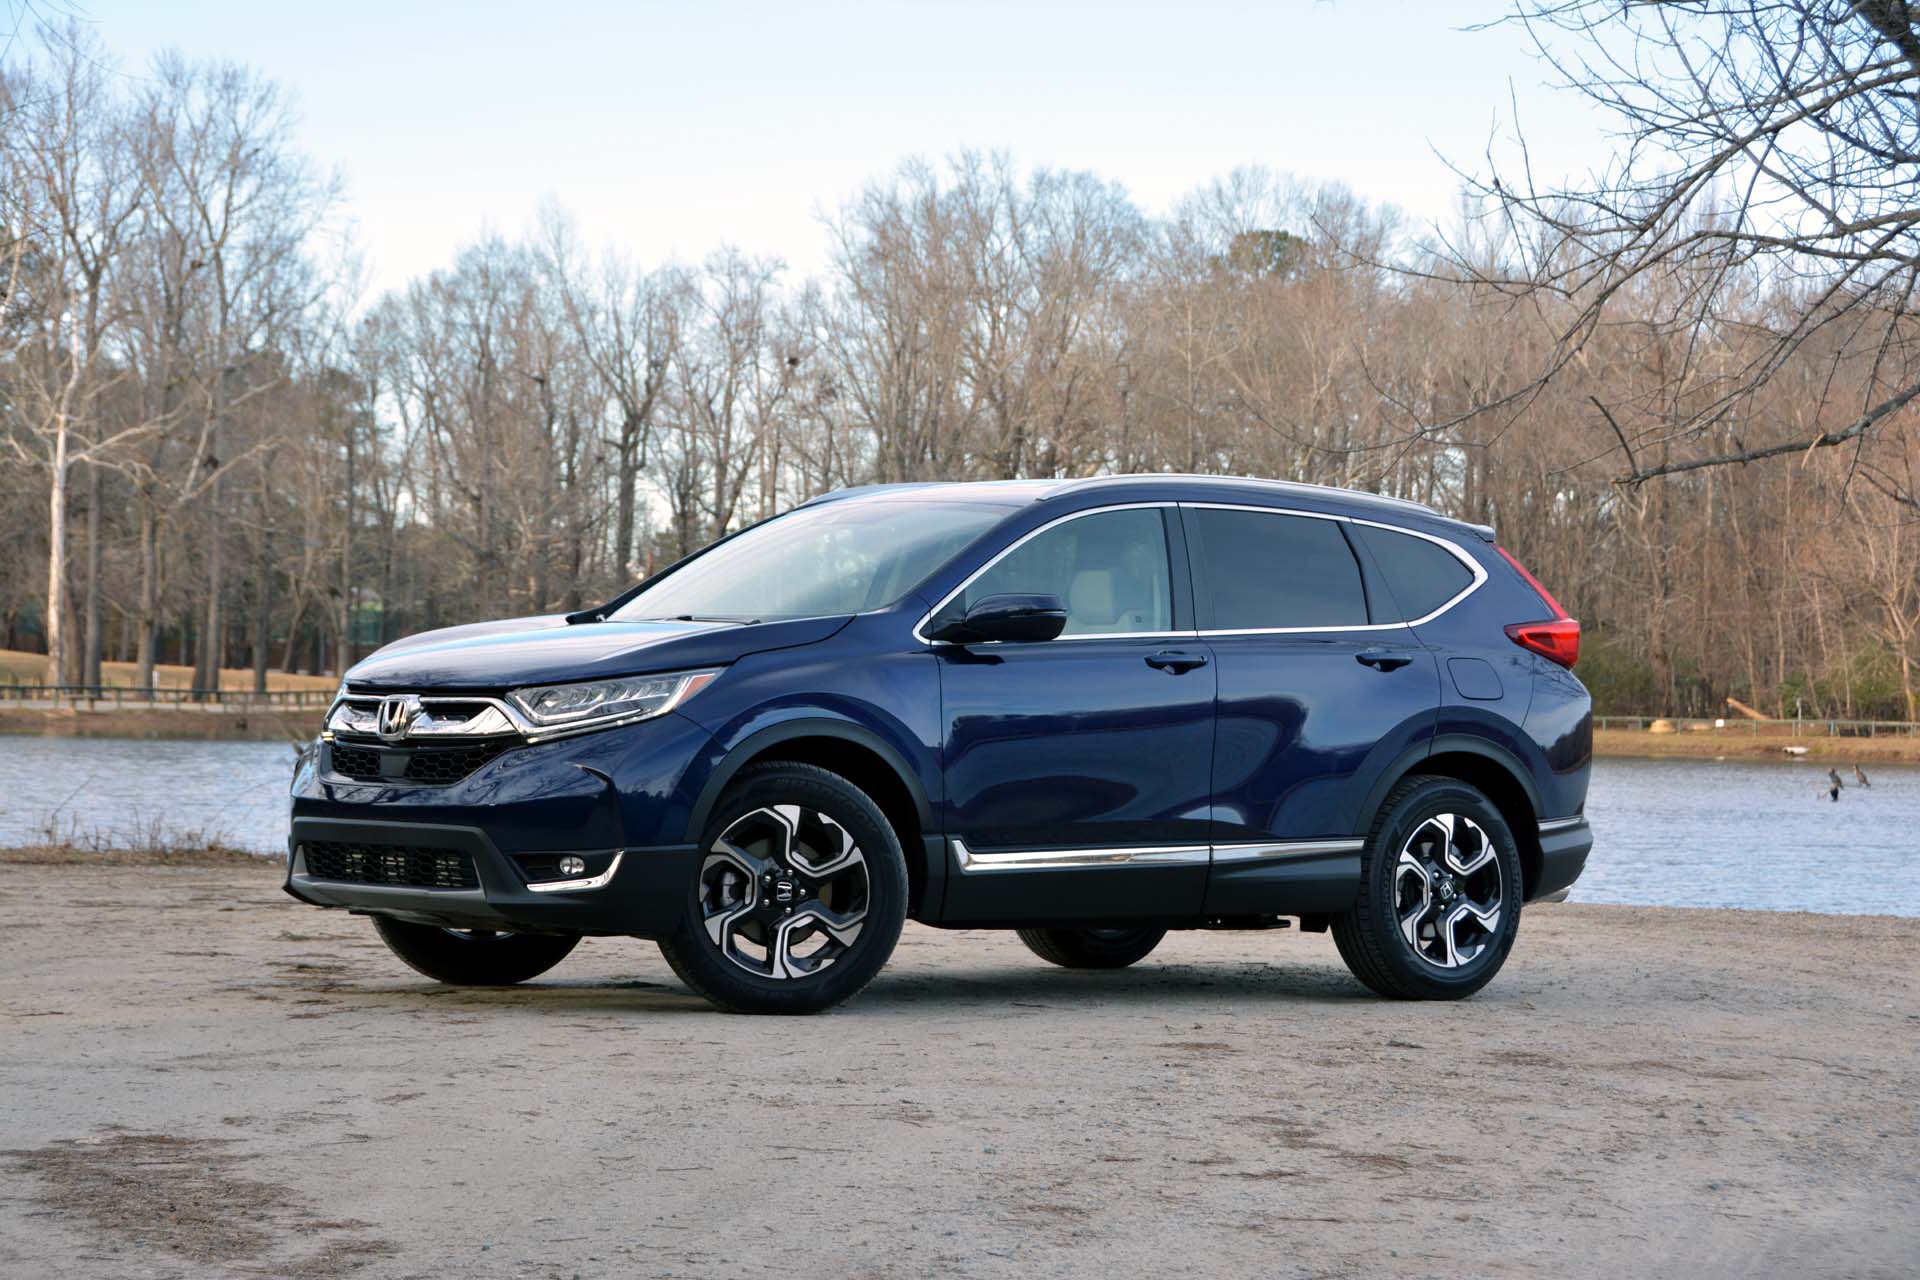 See the exterior of the 2018 Honda CR-V